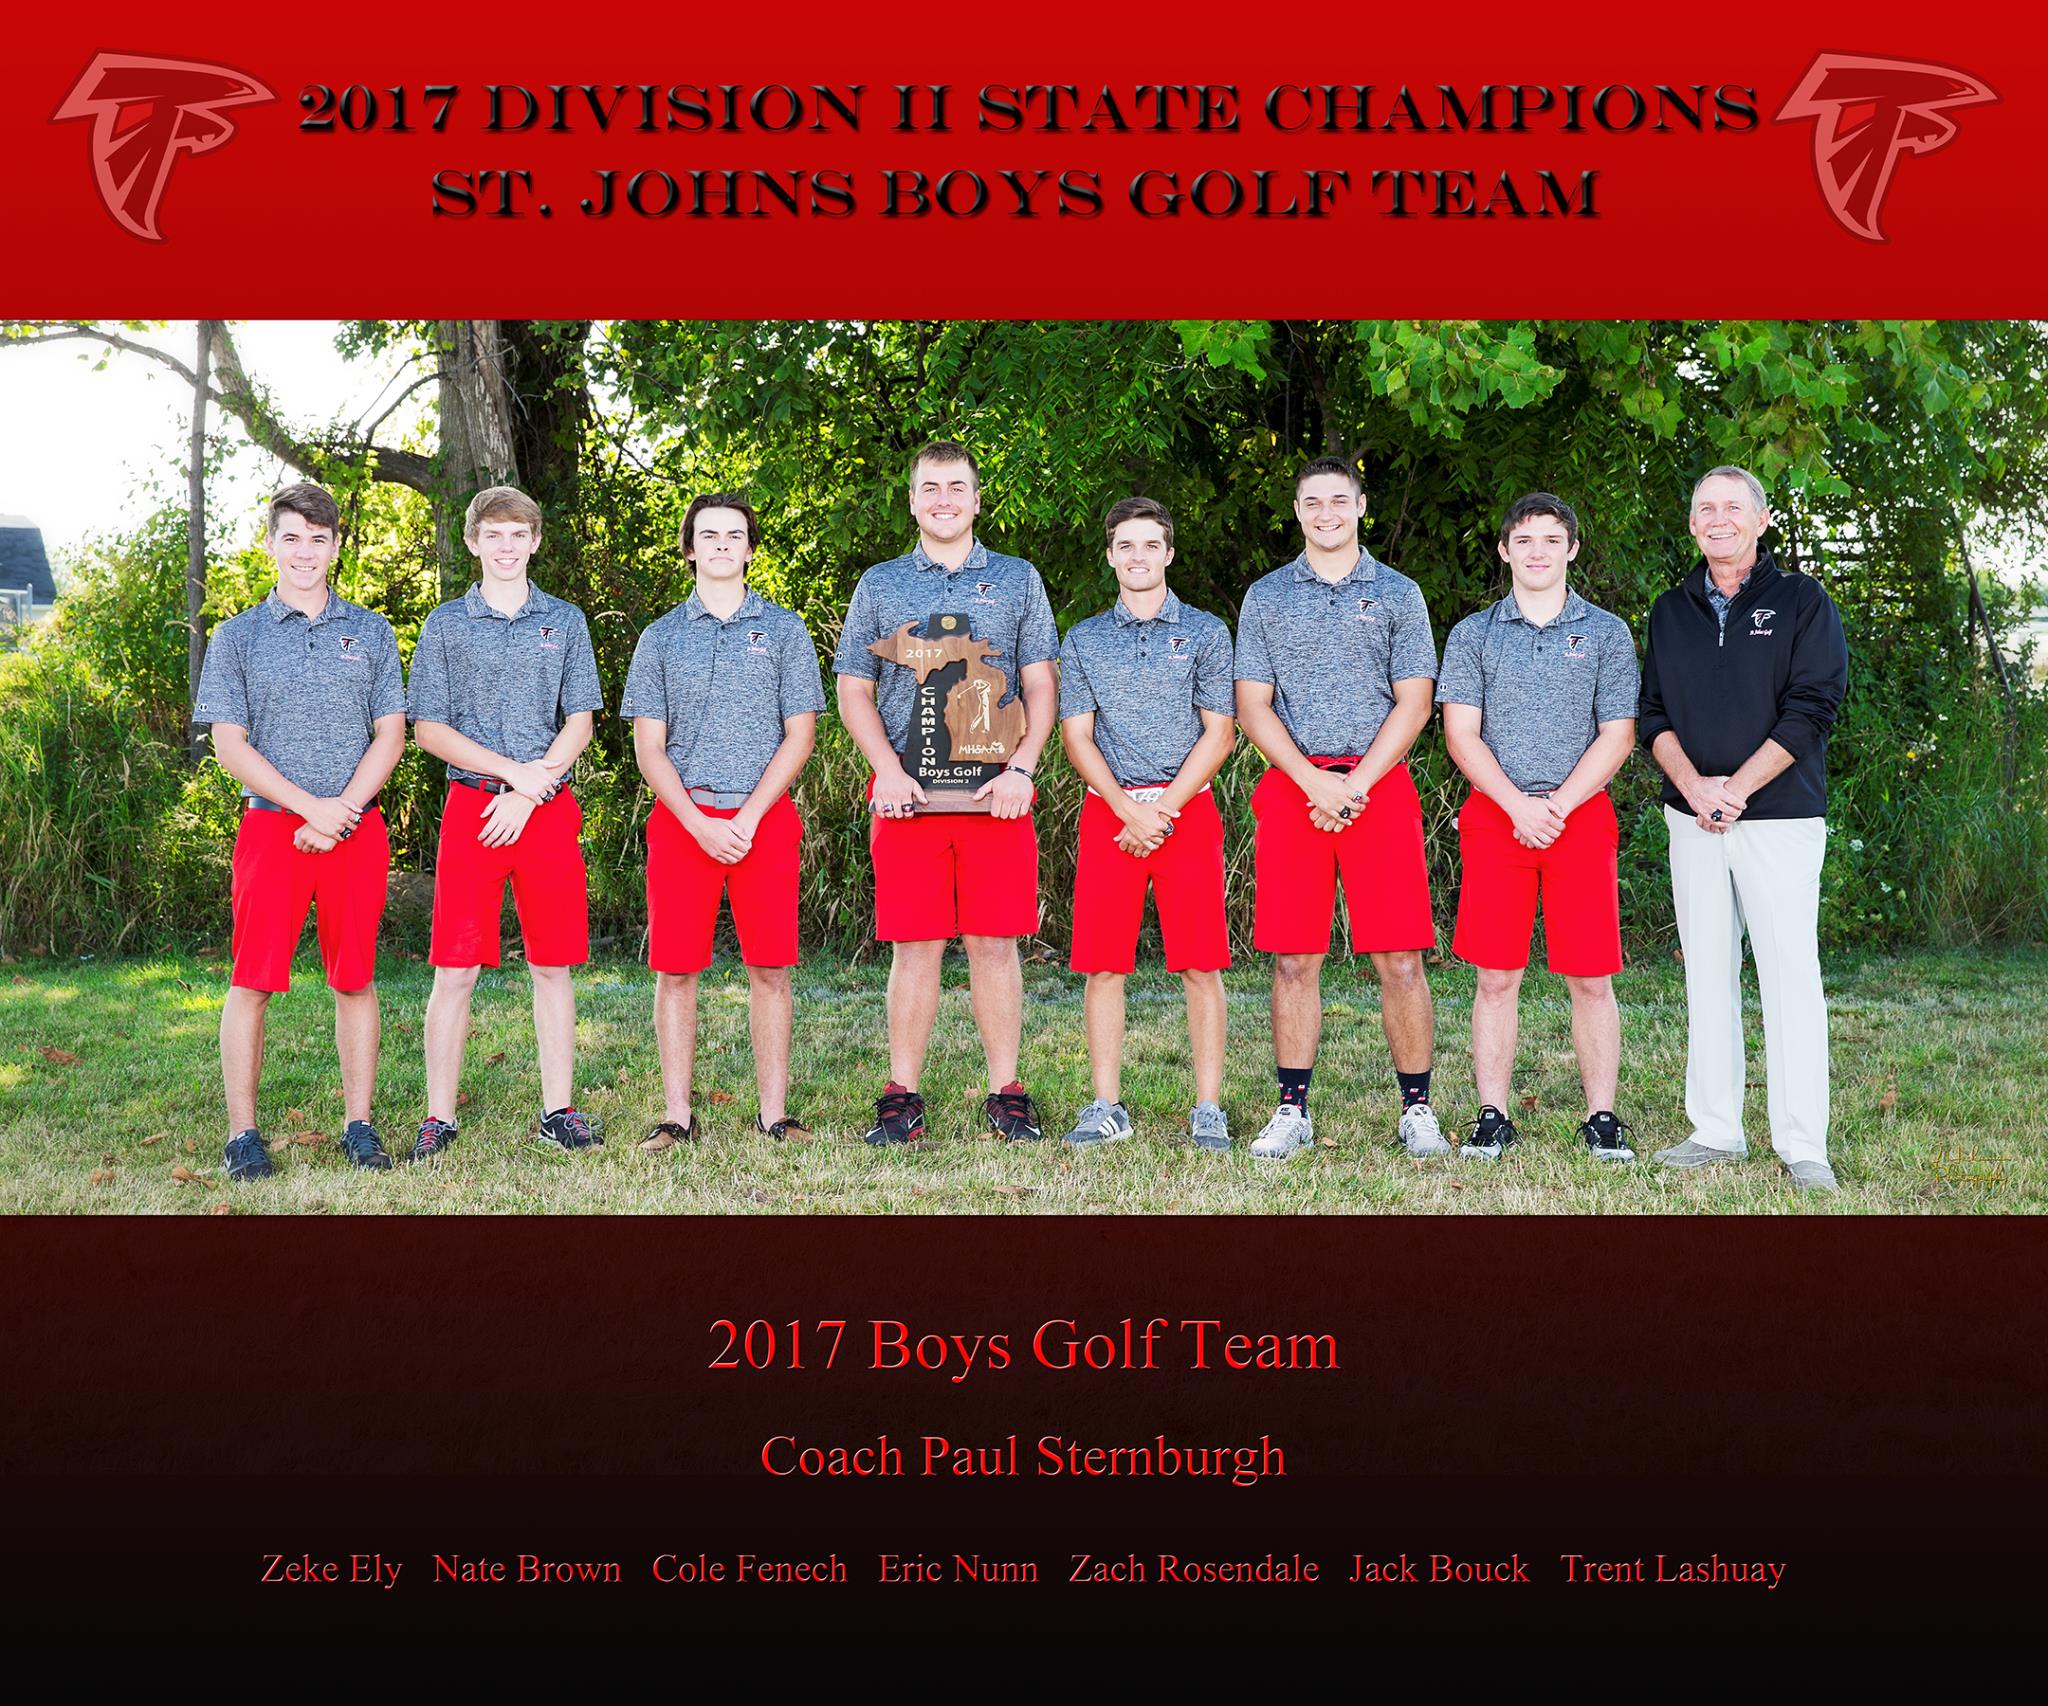 2016-17 MHSAA Boys Golf Division II State Champions